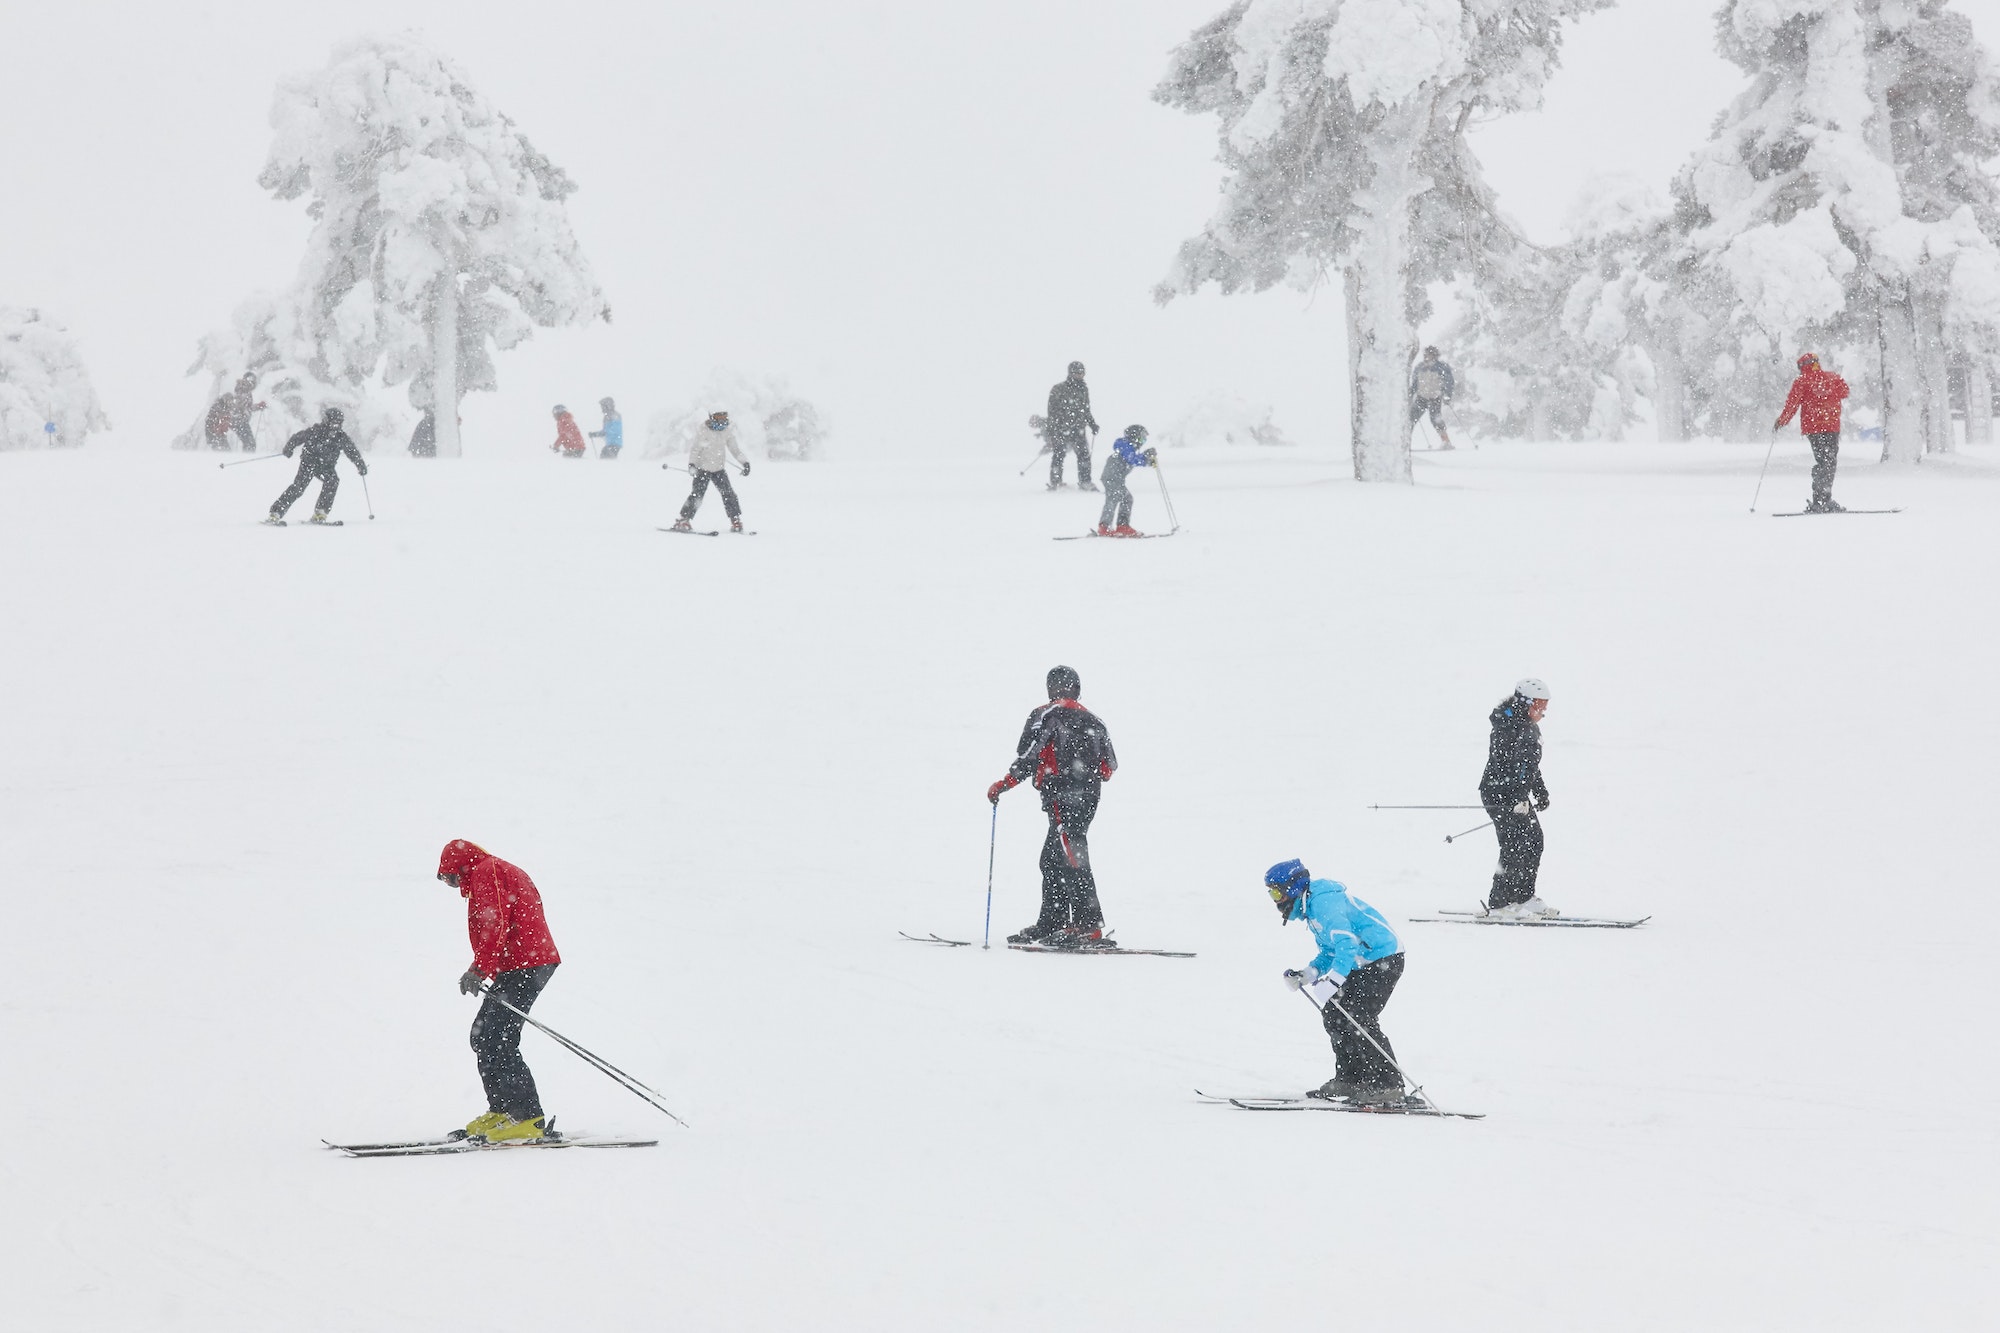 Skiers on a snow forest landscape. Winter sport. Horizontal